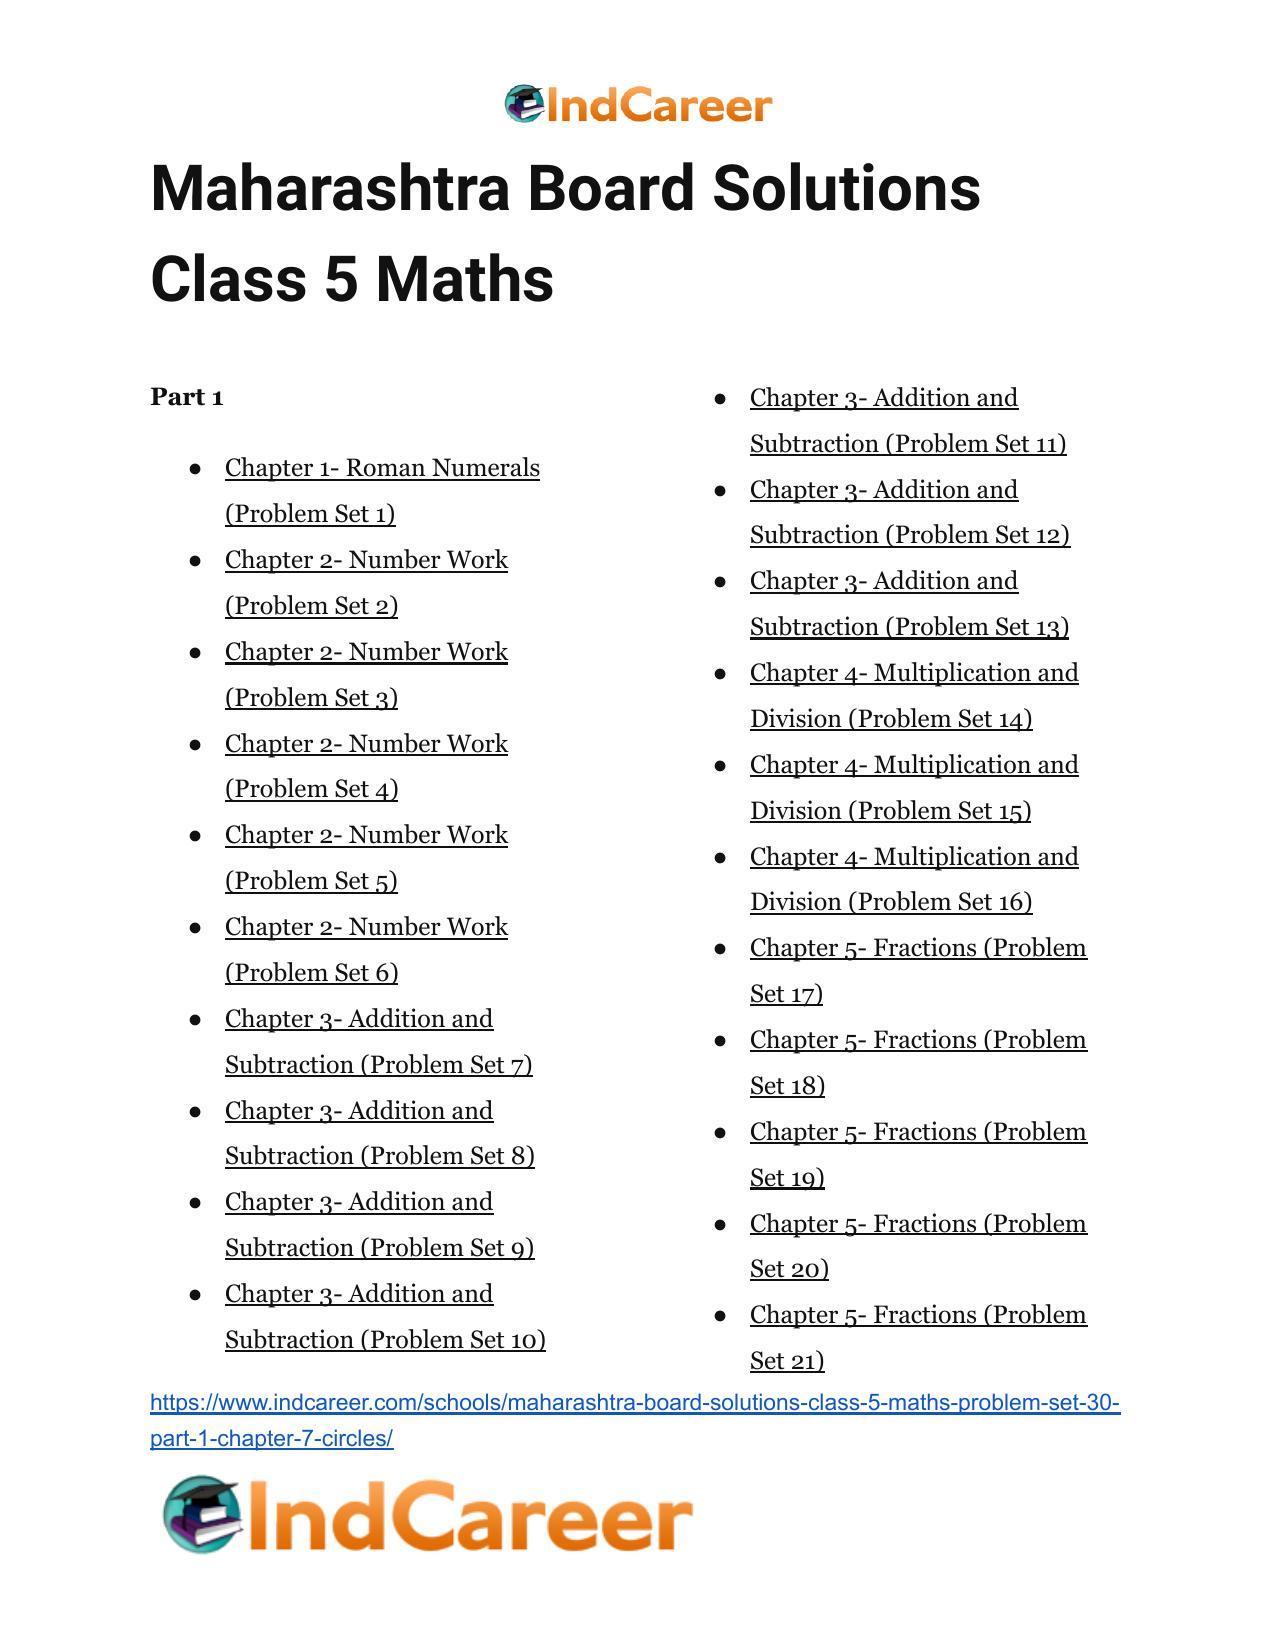 Maharashtra Board Solutions Class 5-Maths (Problem Set 30) - Part 1: Chapter 7- Circles - Page 7